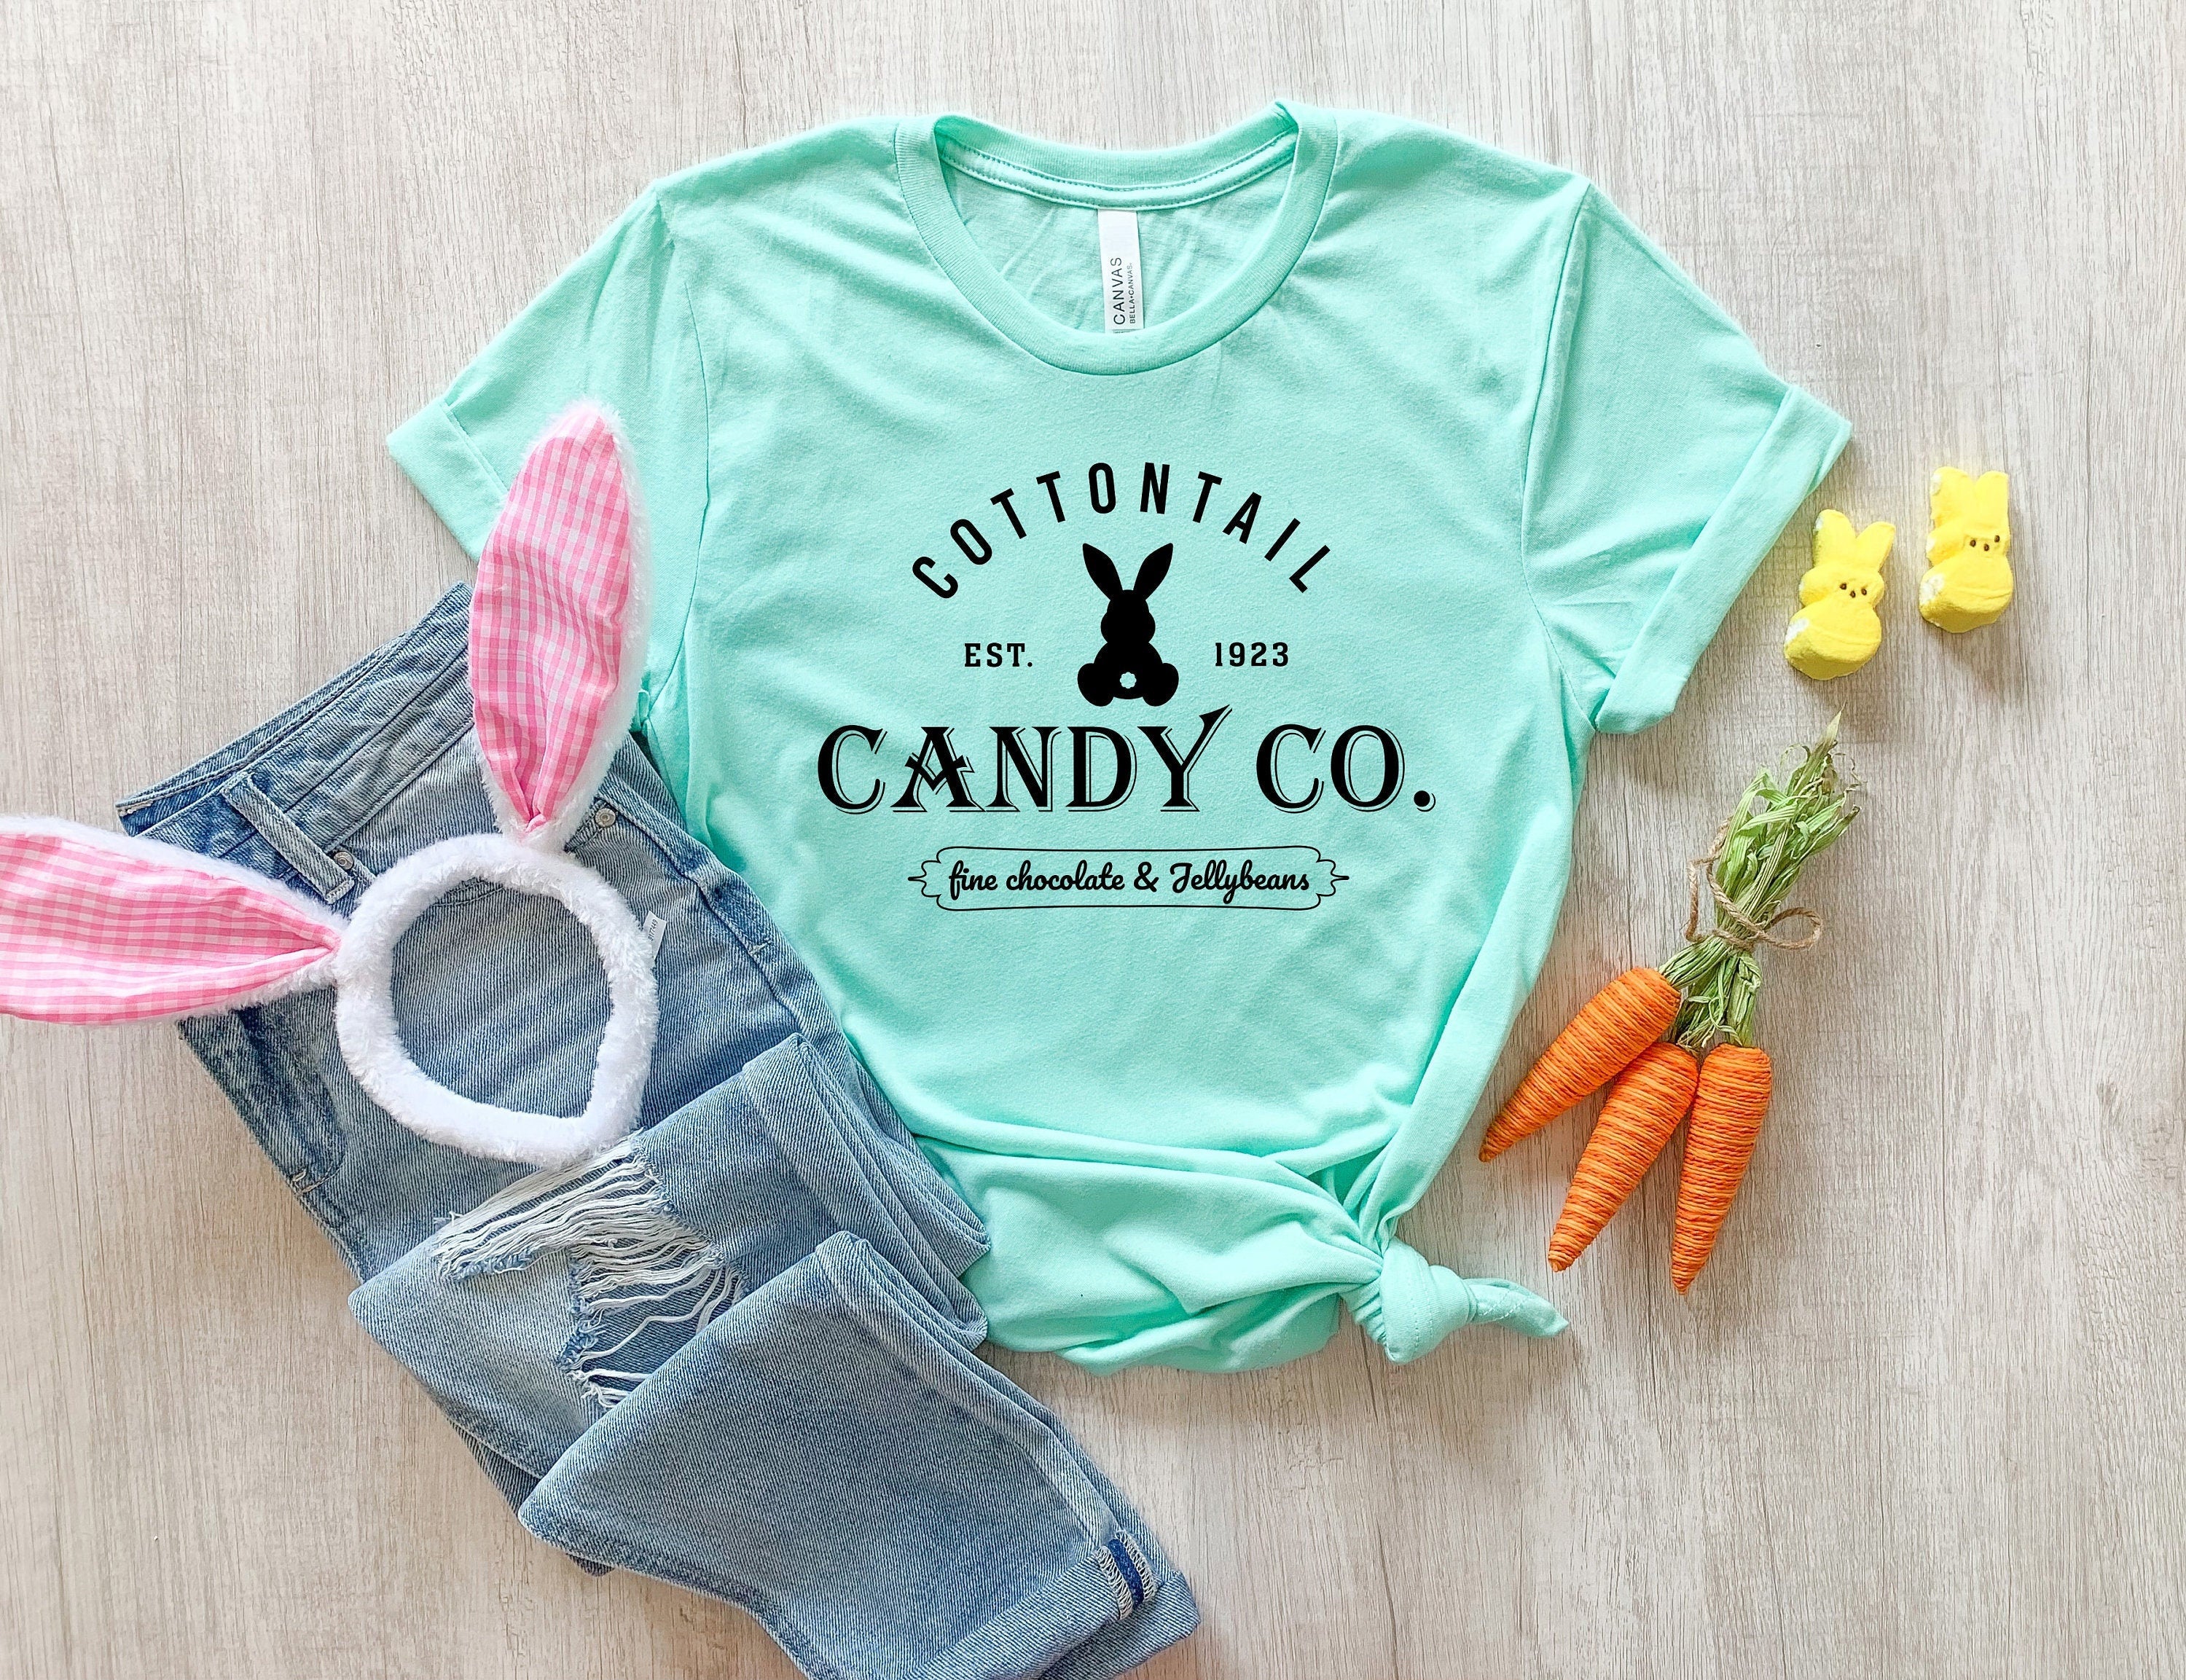 Chemise Cottontail Candy Co